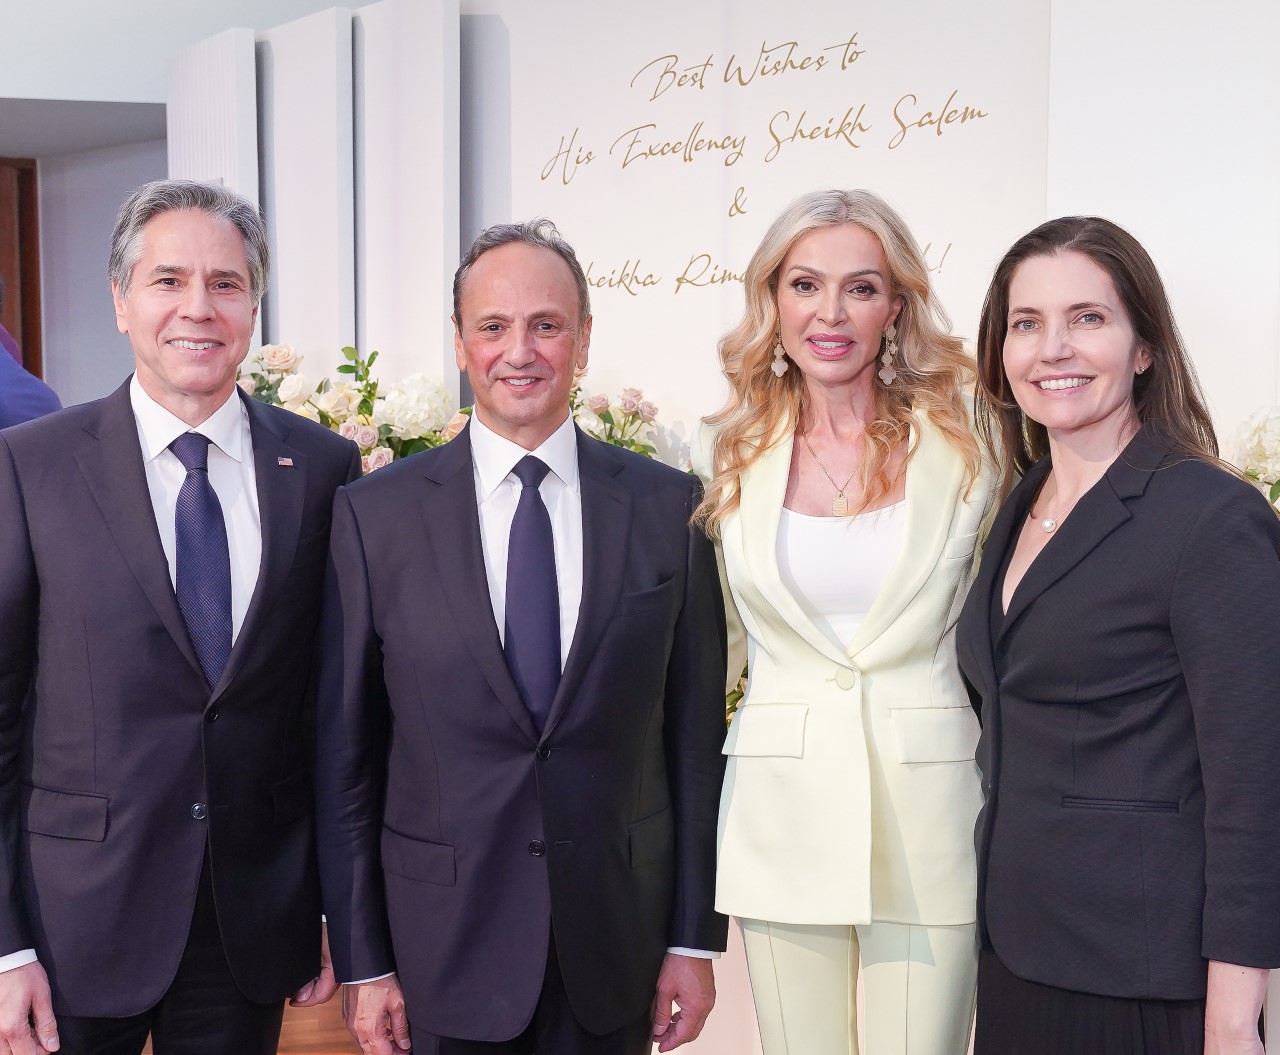 US Secretary of State Antony Blinken and his wife with Kuwait’s Ambassador to US Sheikh Salem Al-Sabah and his wife Rima